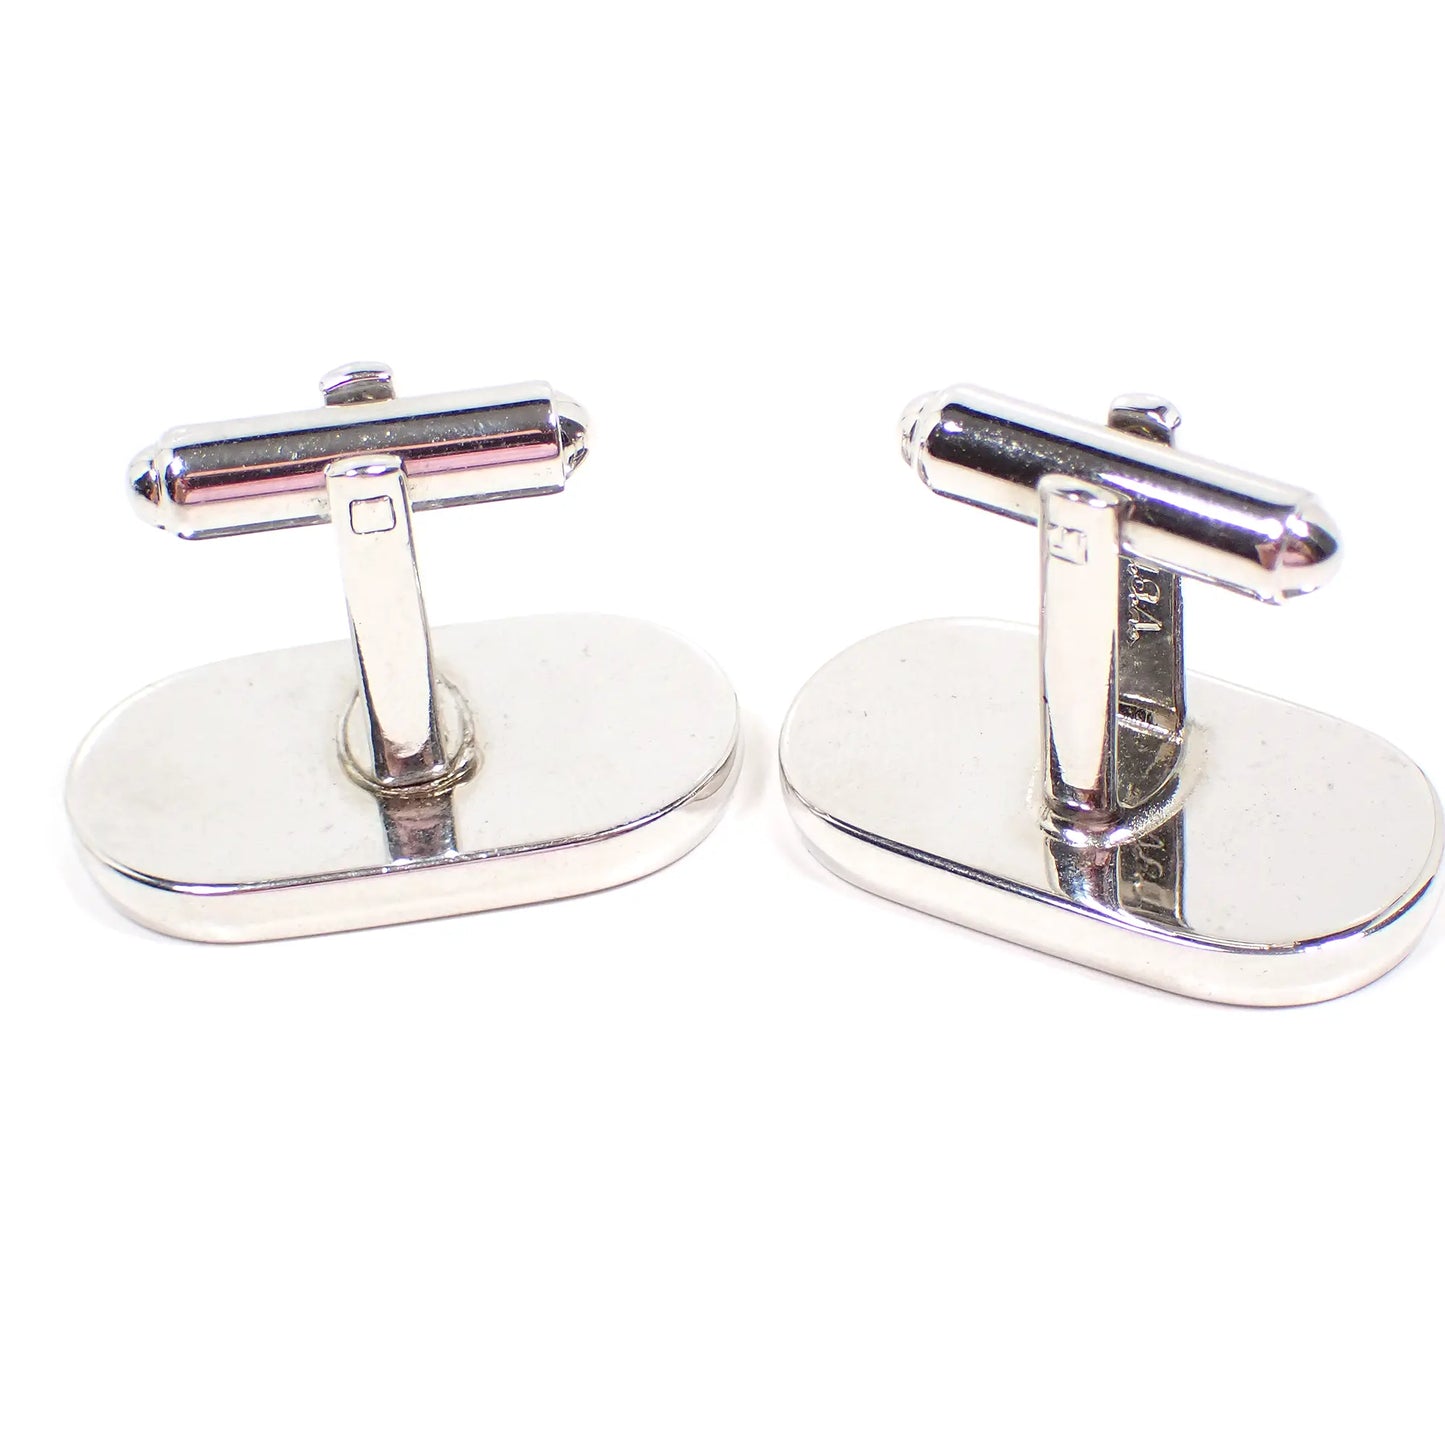 Hickok Indented Oval Vintage Cufflinks, Retro Silver Tone Cuff Links